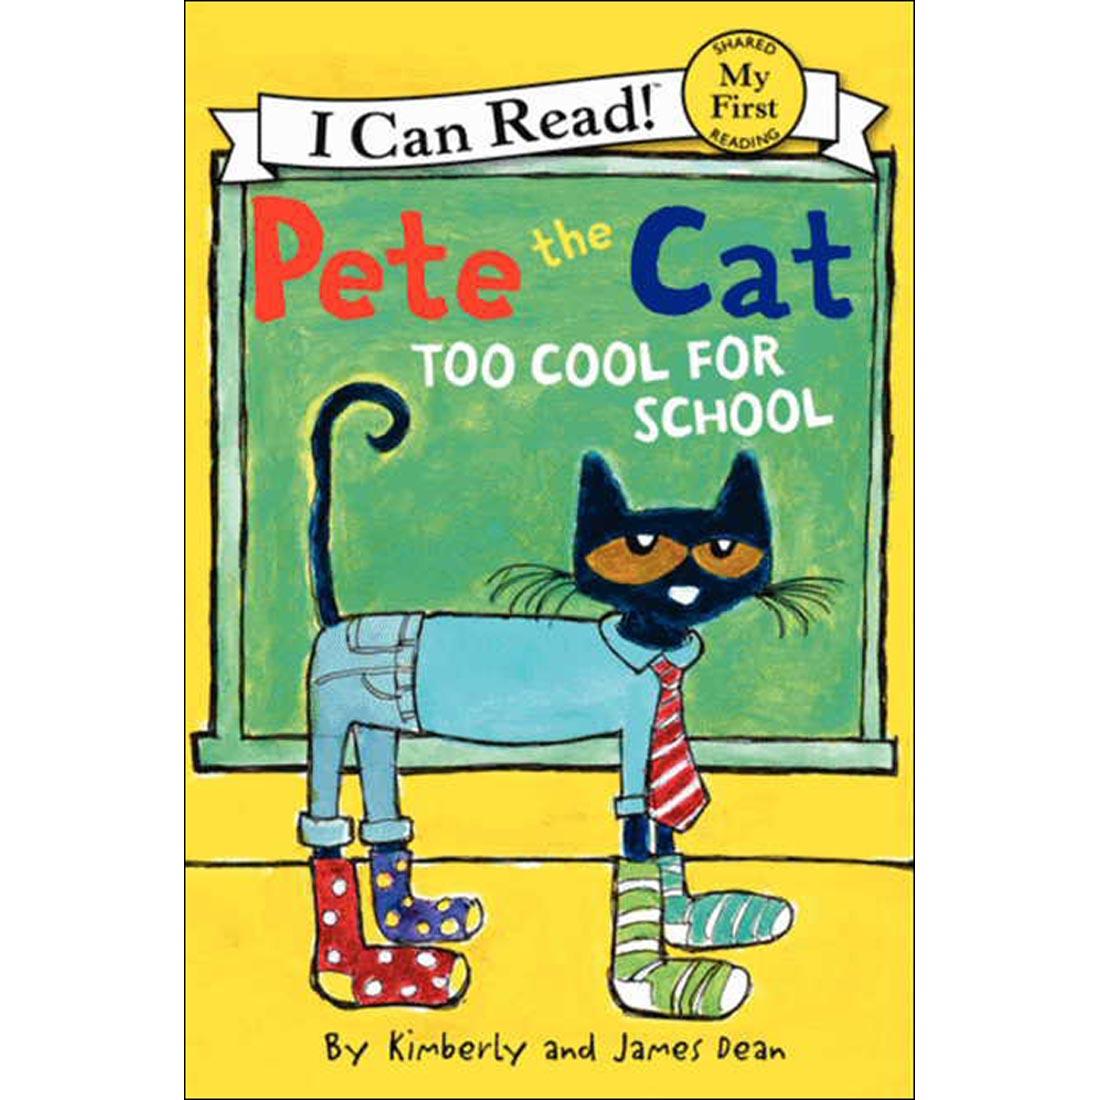 Pete The Cat: Too Cool For School - A My First I Can Read Book, Shared Reading